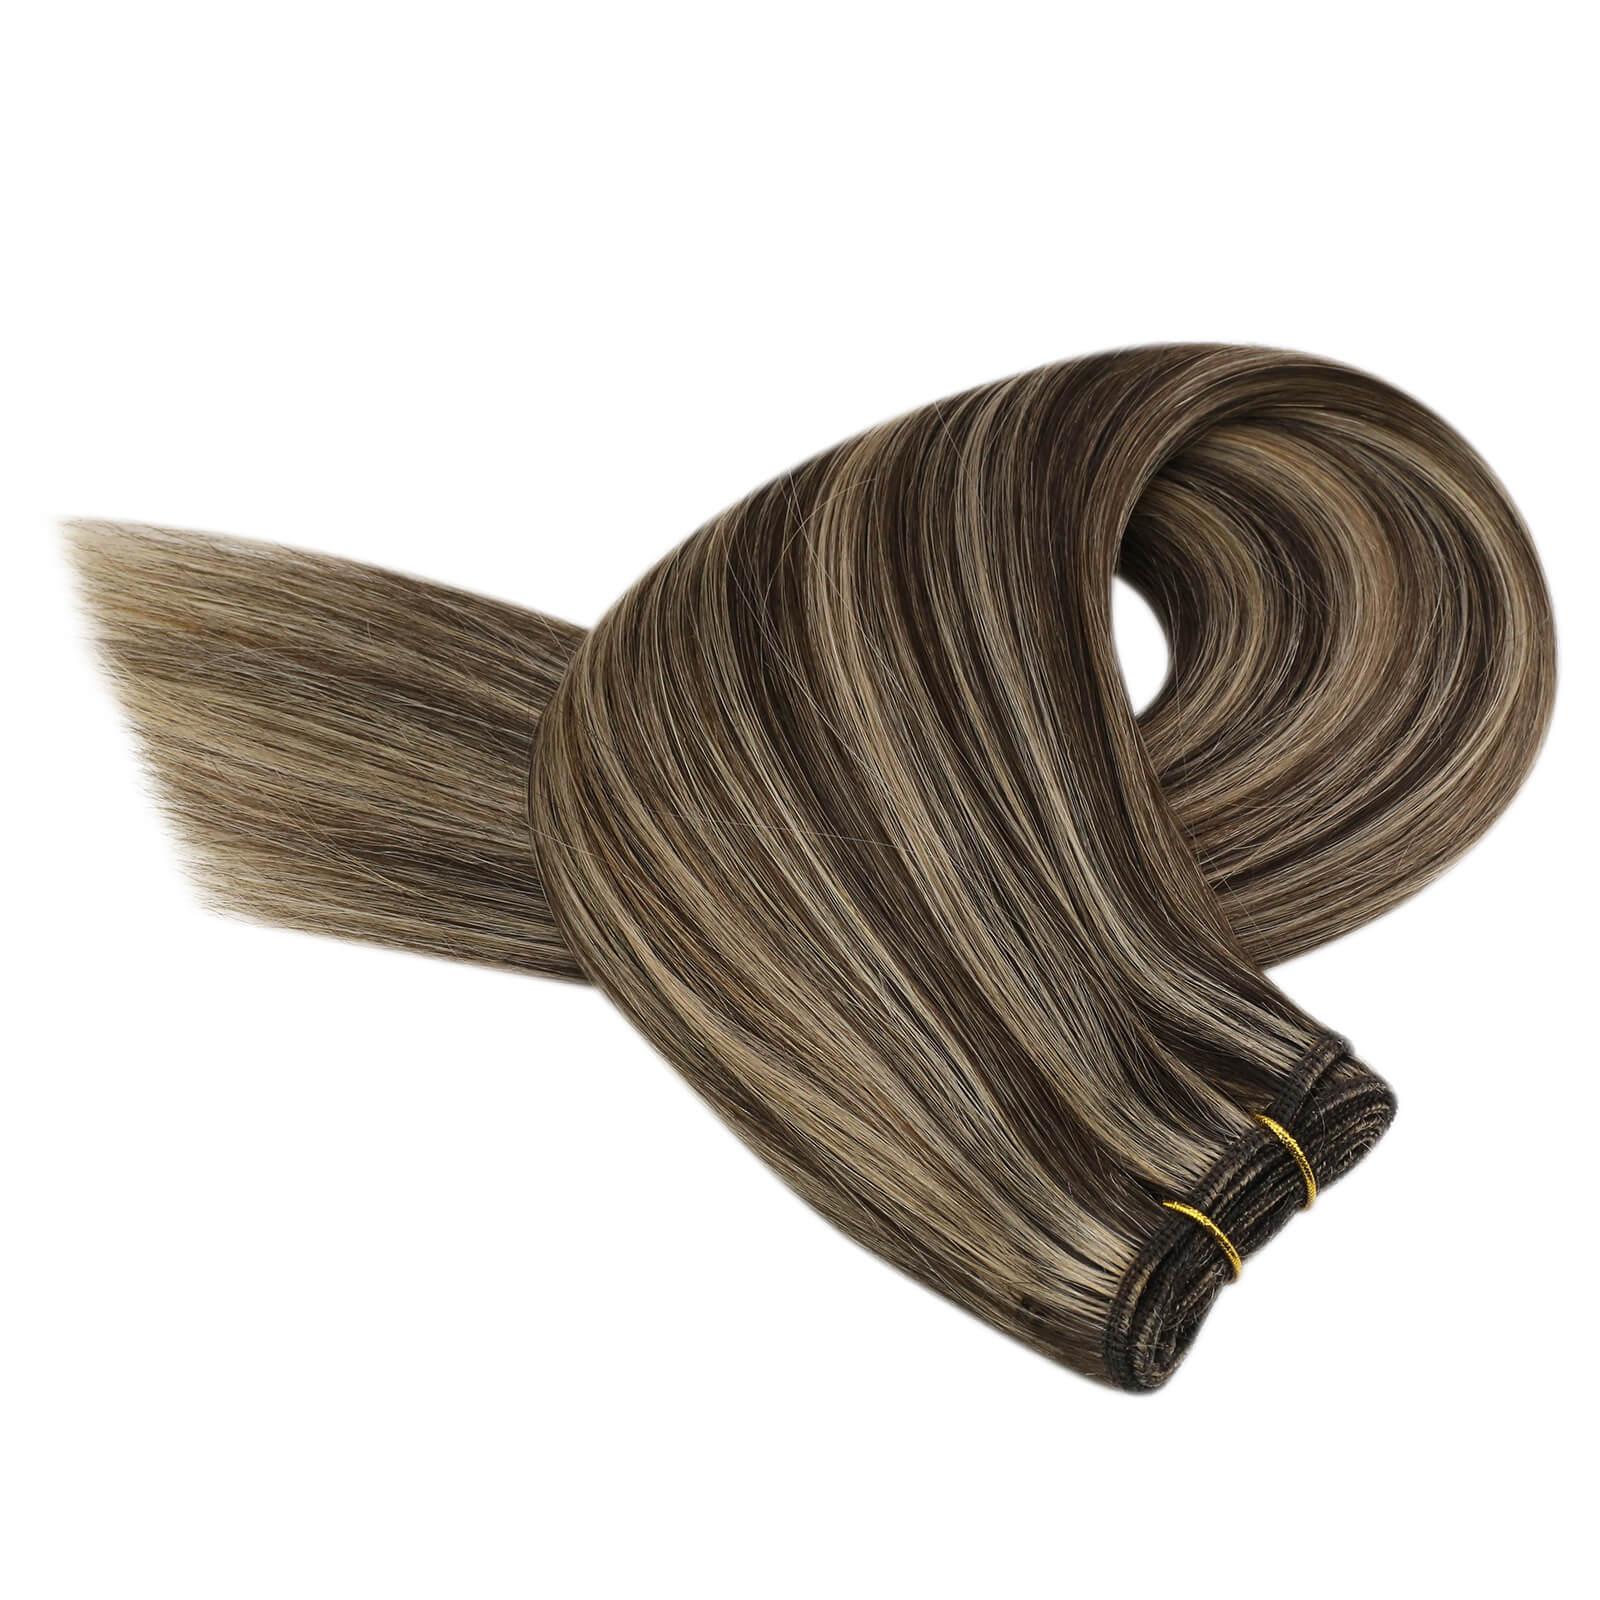 brown to blonde weft hair extensions